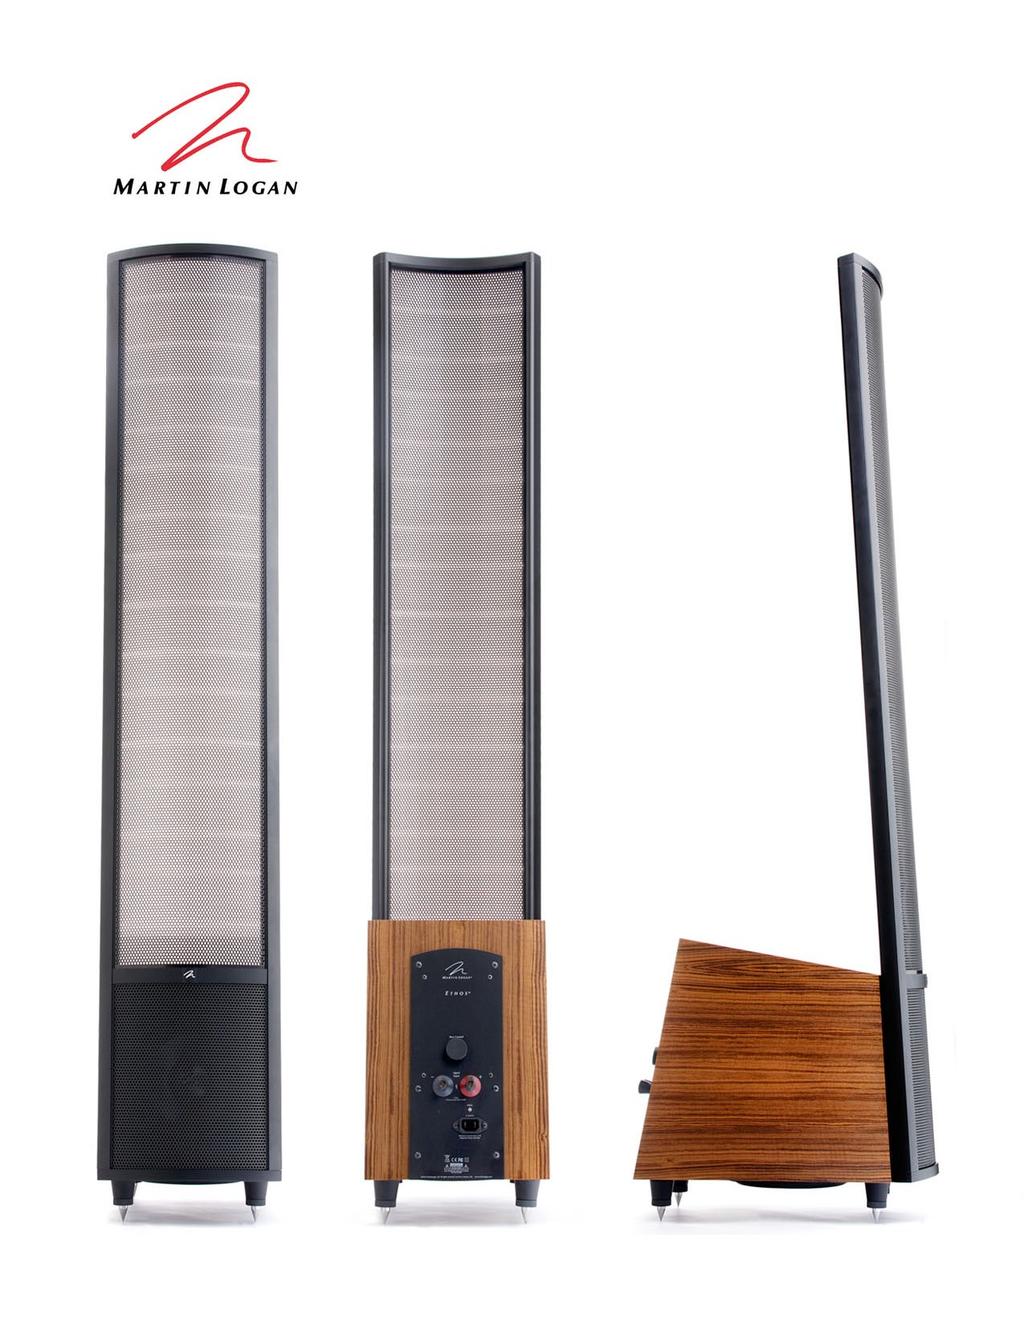 Martin Logan Ethos. Refined for 30 years.